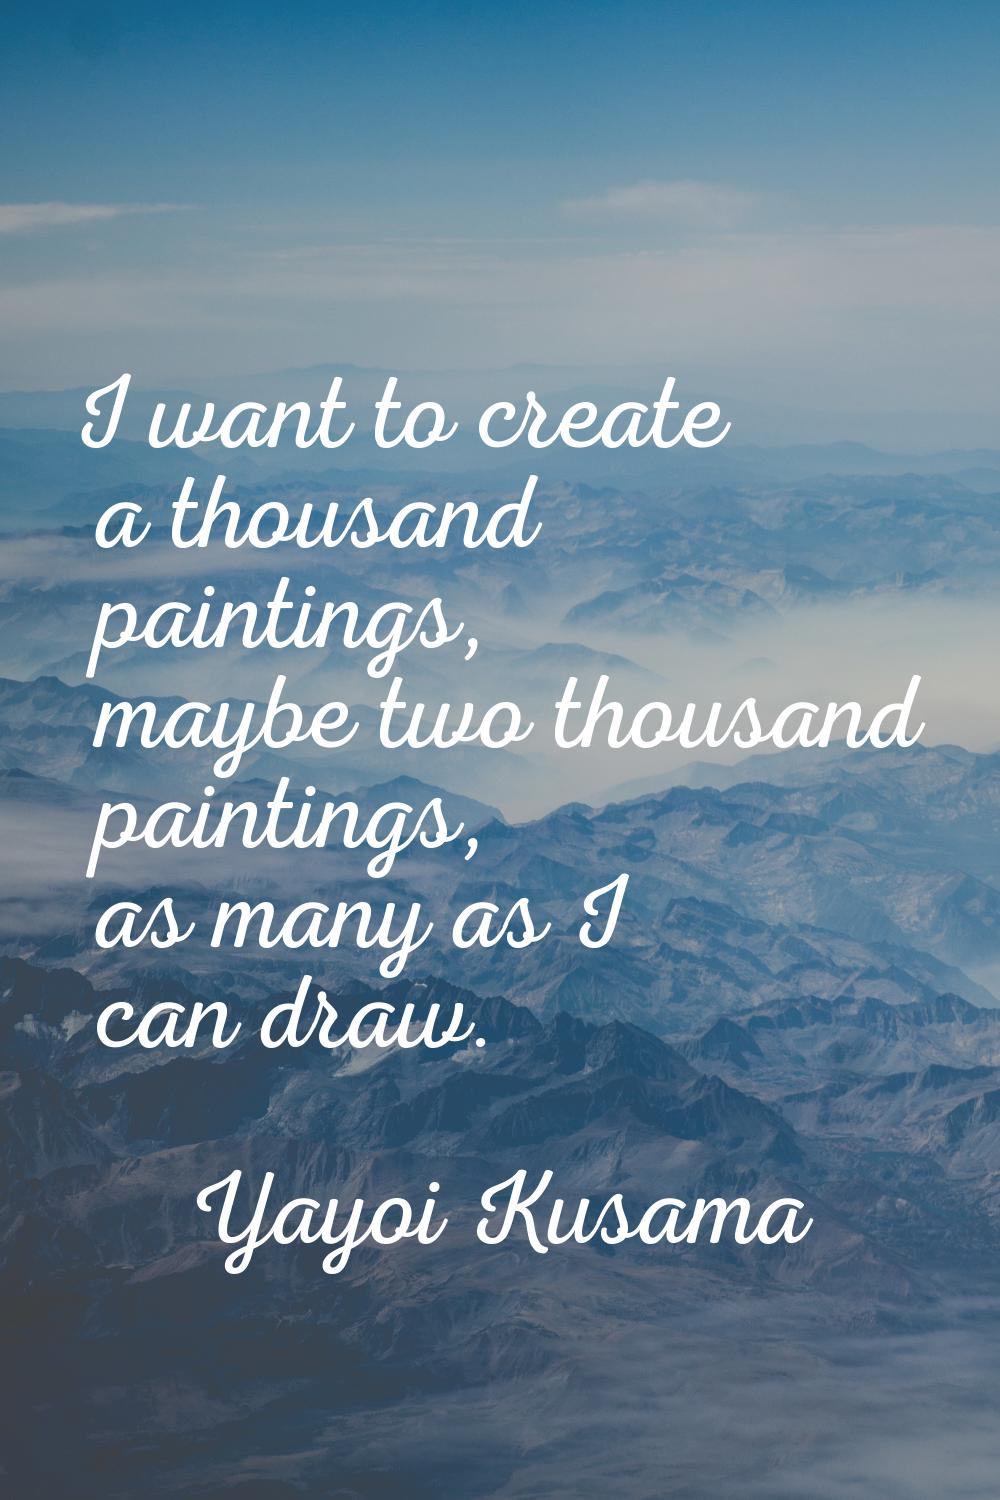 I want to create a thousand paintings, maybe two thousand paintings, as many as I can draw.